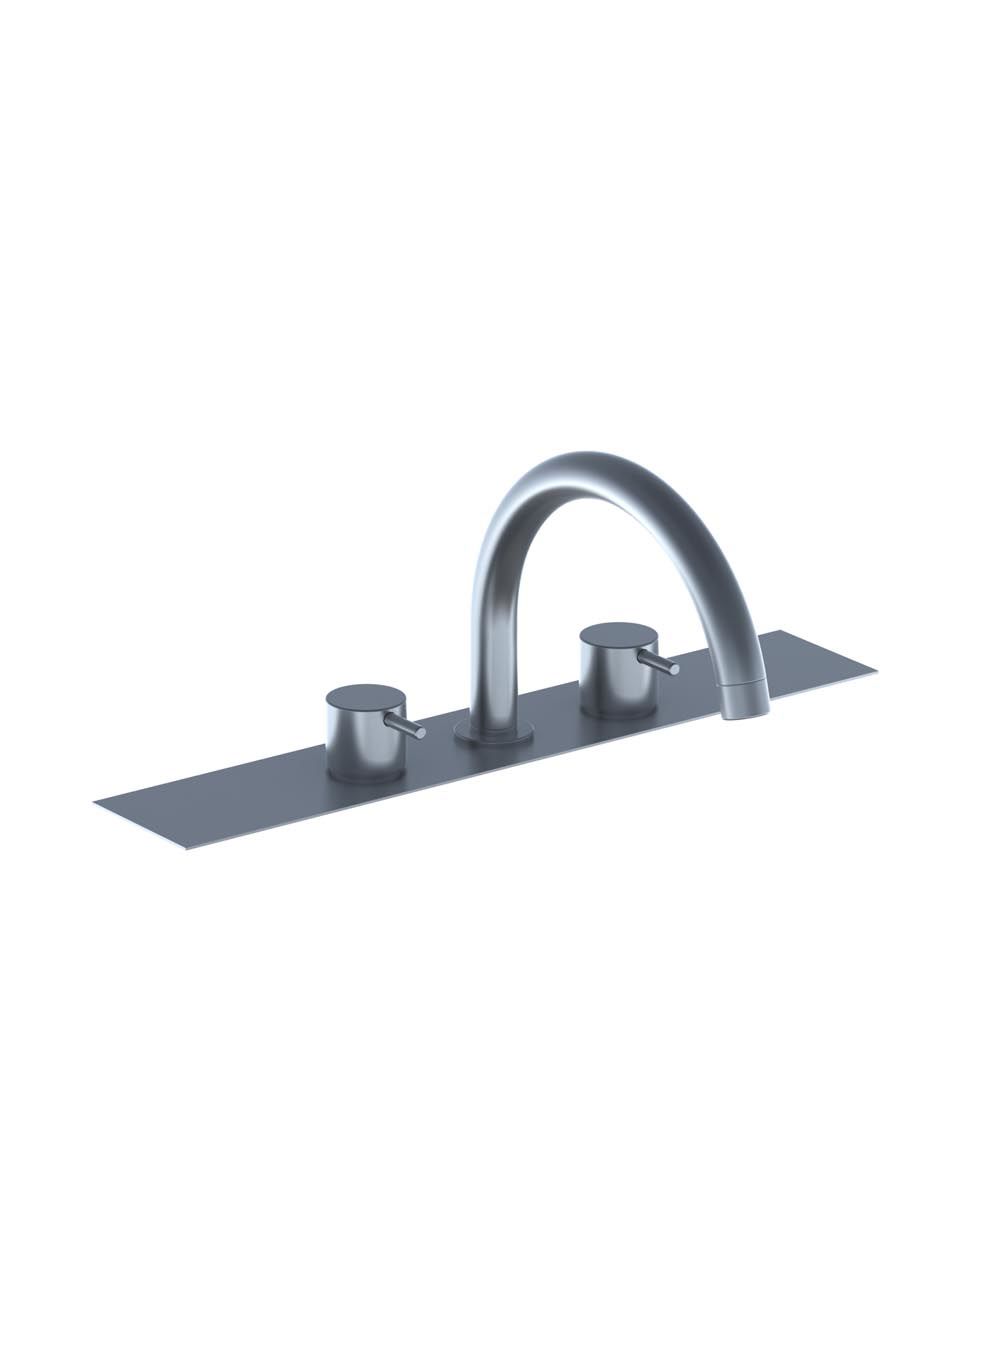 BK8: Two-handle mixer with swivel spout for bath filling. Complete with adjustable bracket and water coll